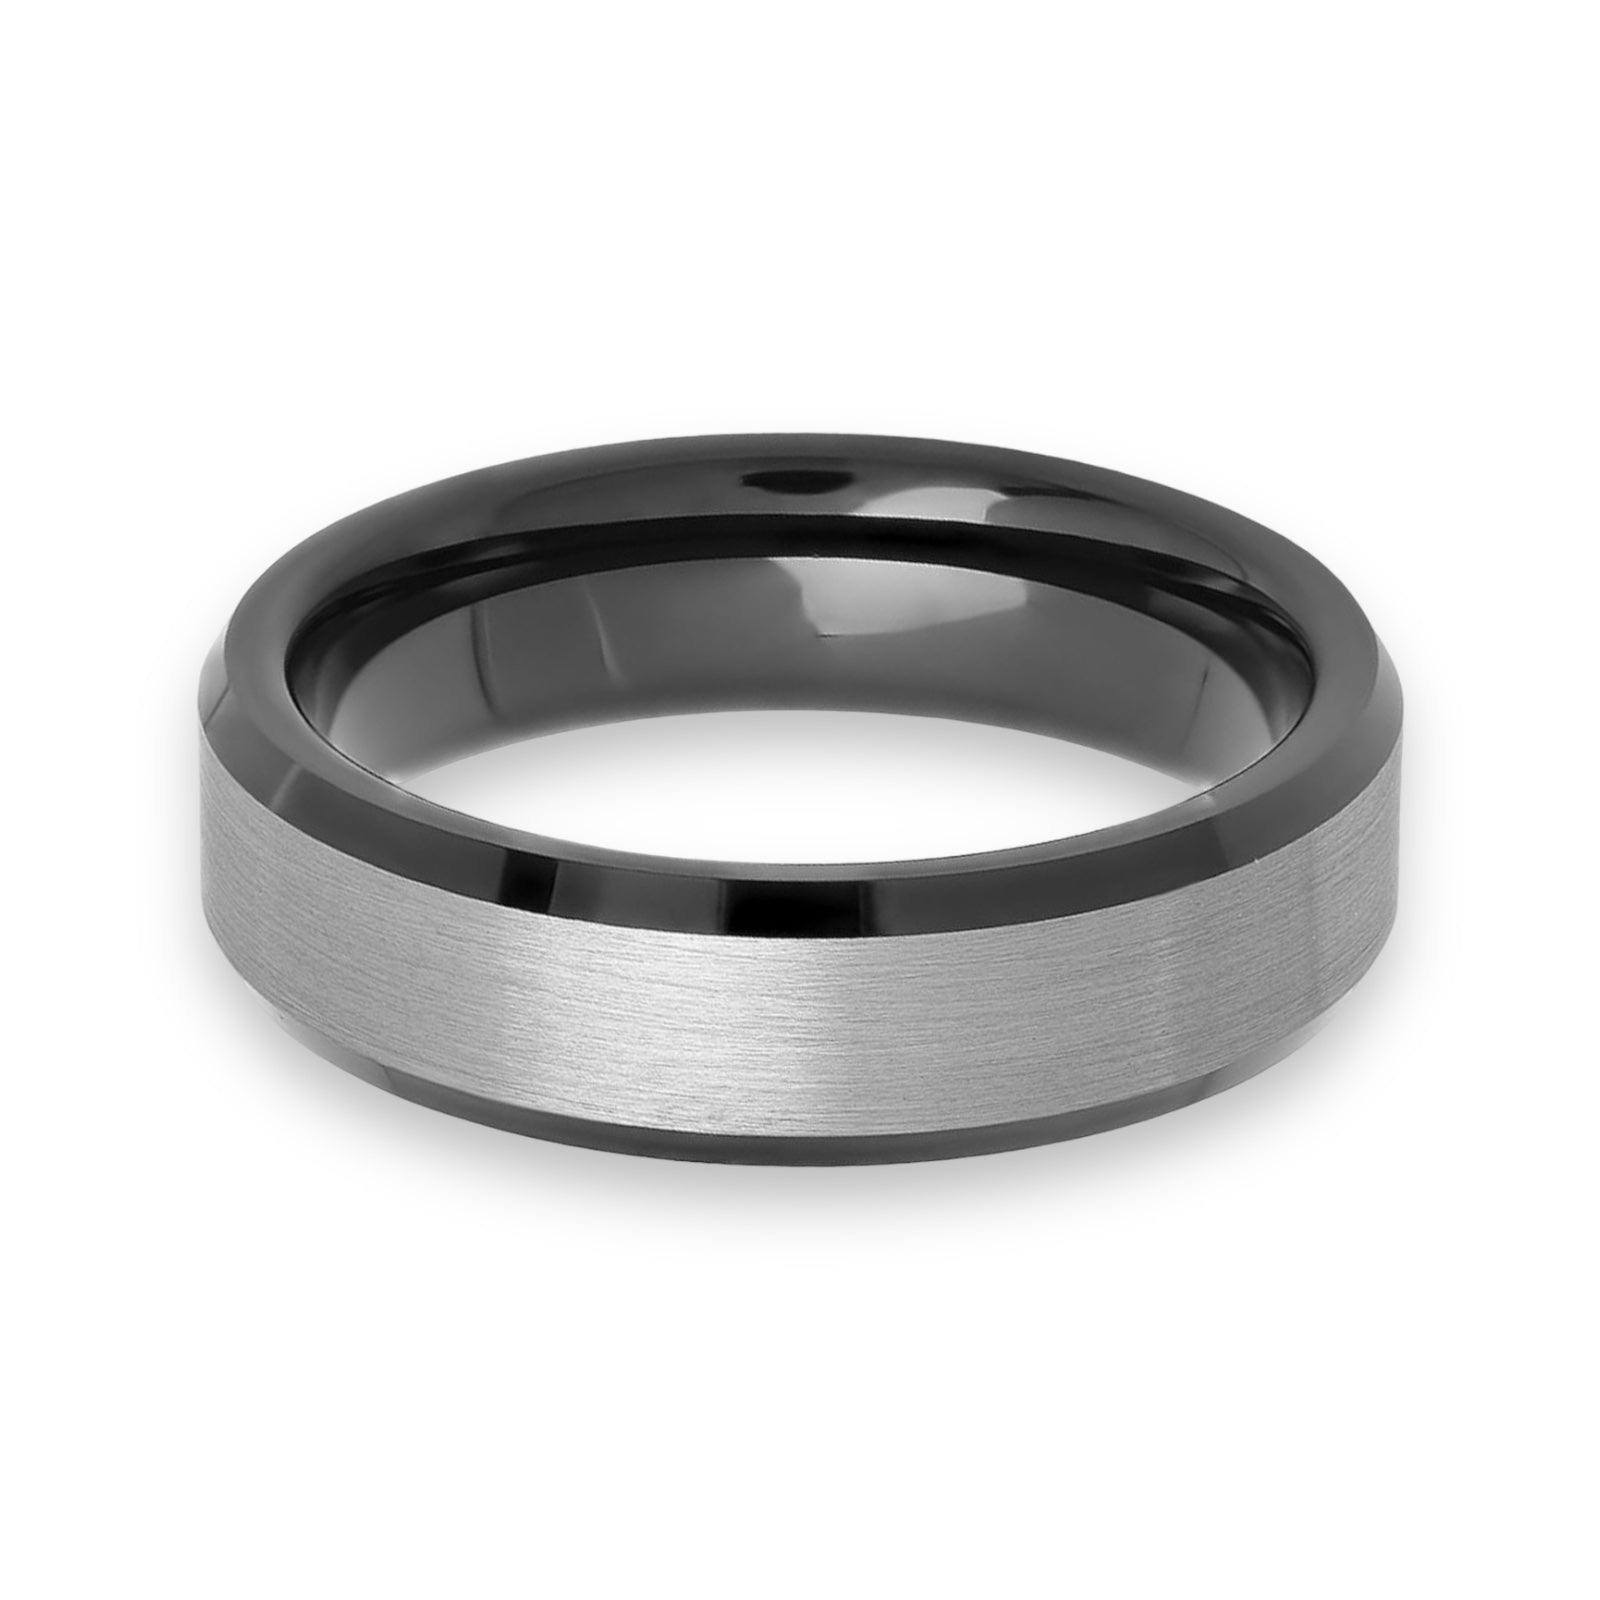 Tungsten Ring Two-Tone Black And Brushed Silver Color Beveled Edges Band